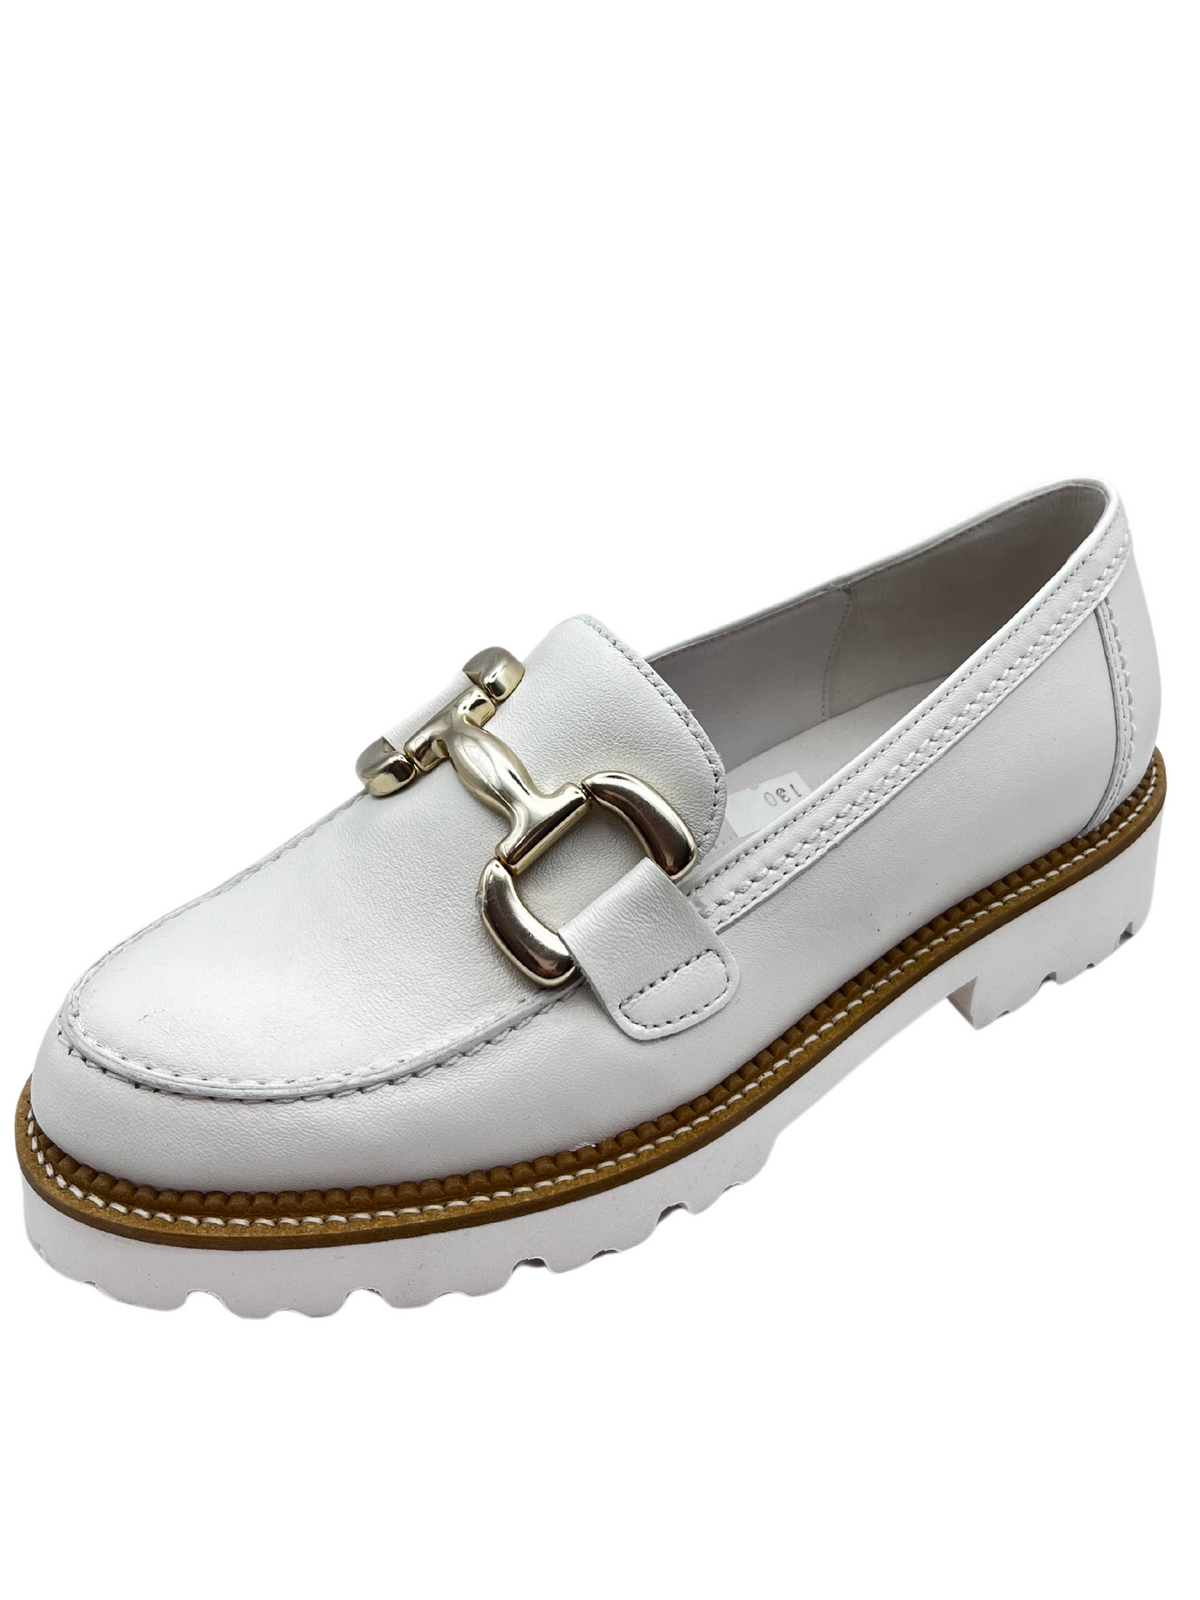 Gabor White Leather Loafer With Gold Chain Detail